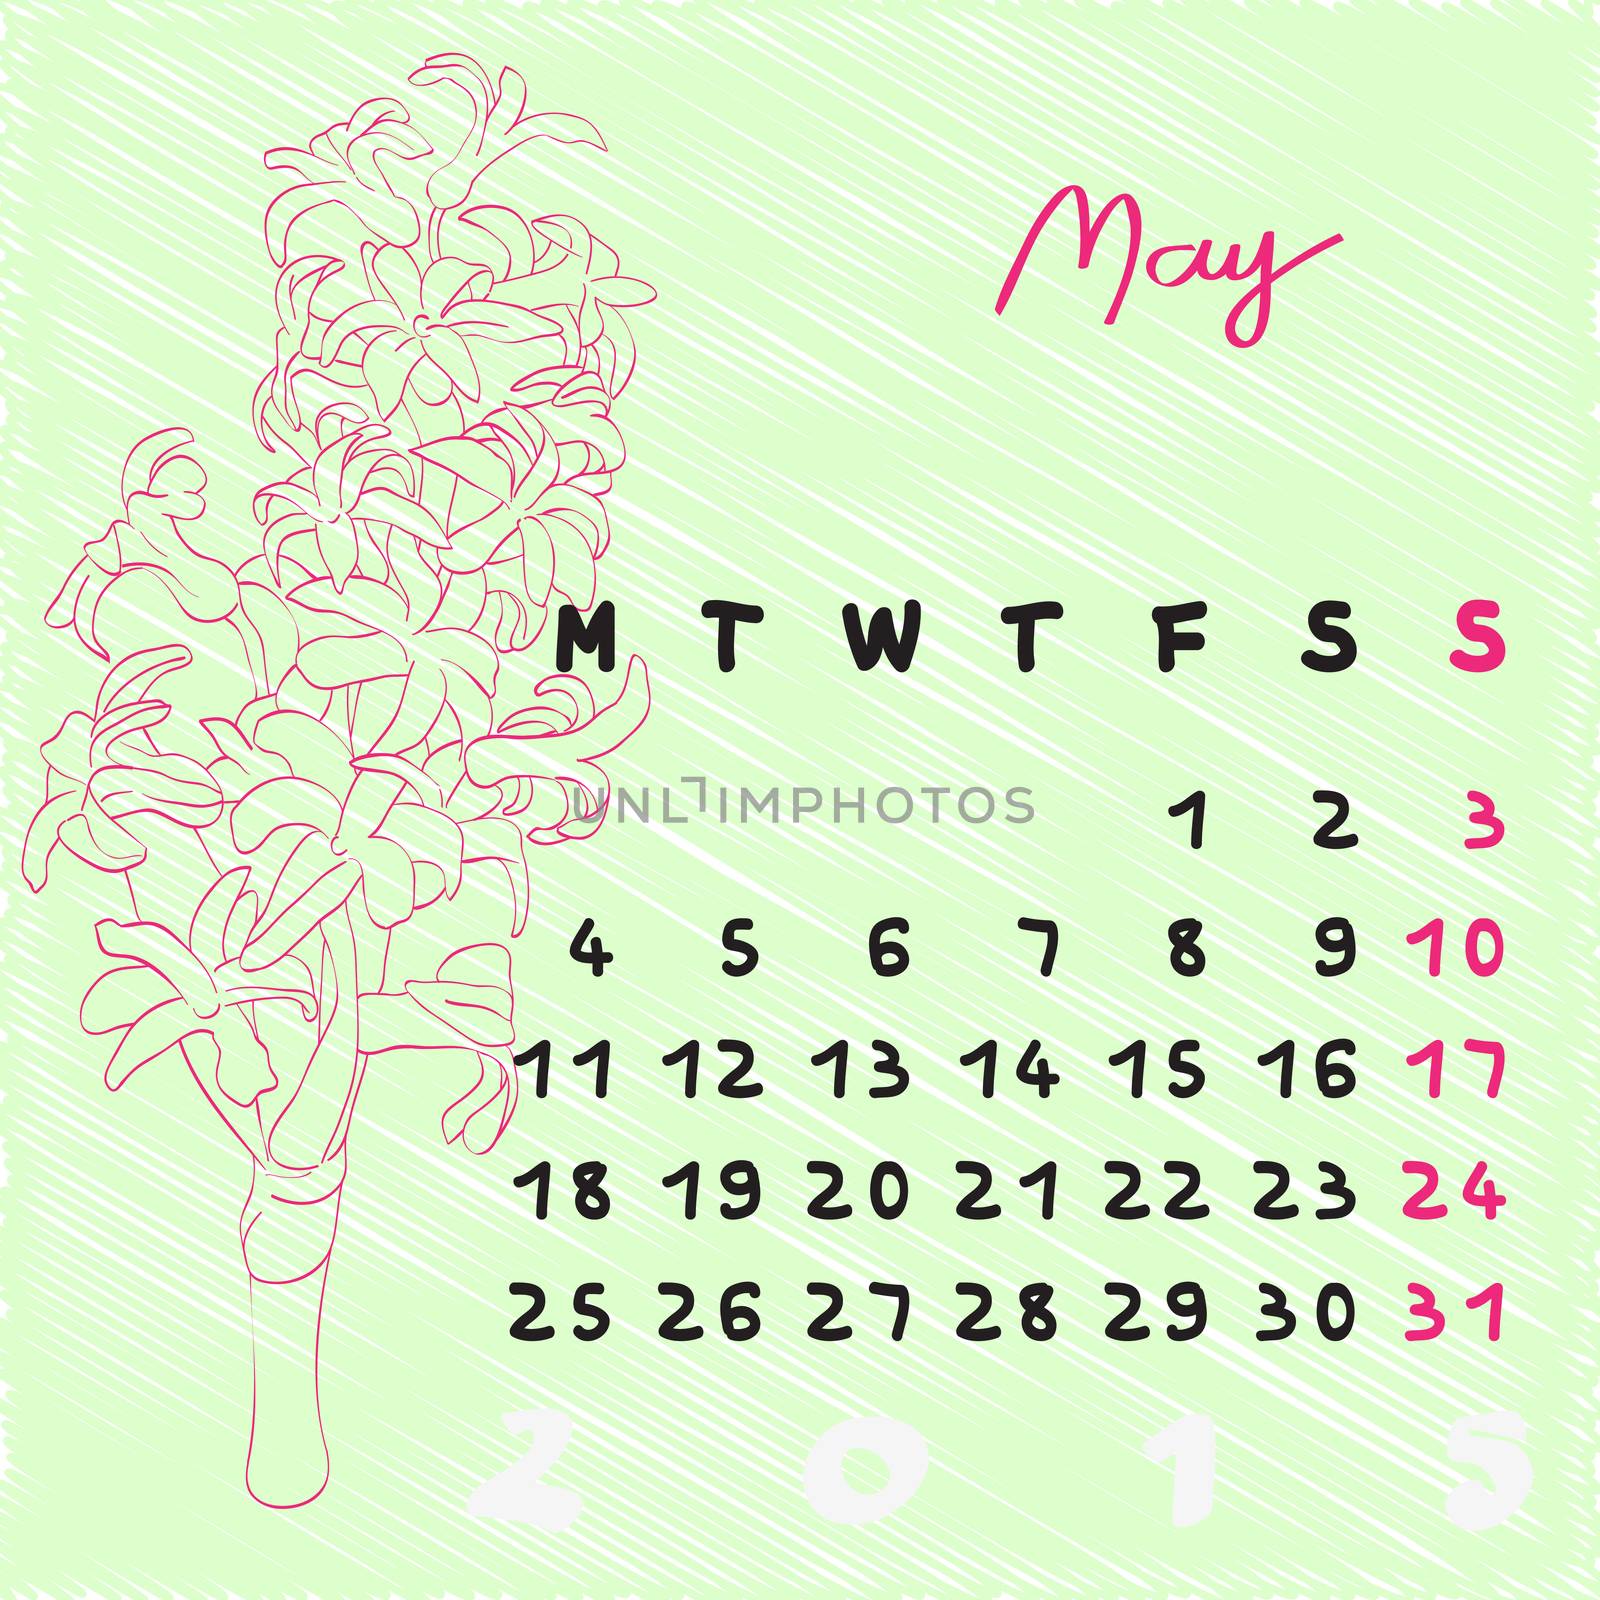 Calendar 2015, graphic illustration of May month calendar with original hand drawn text and hyacinth flower